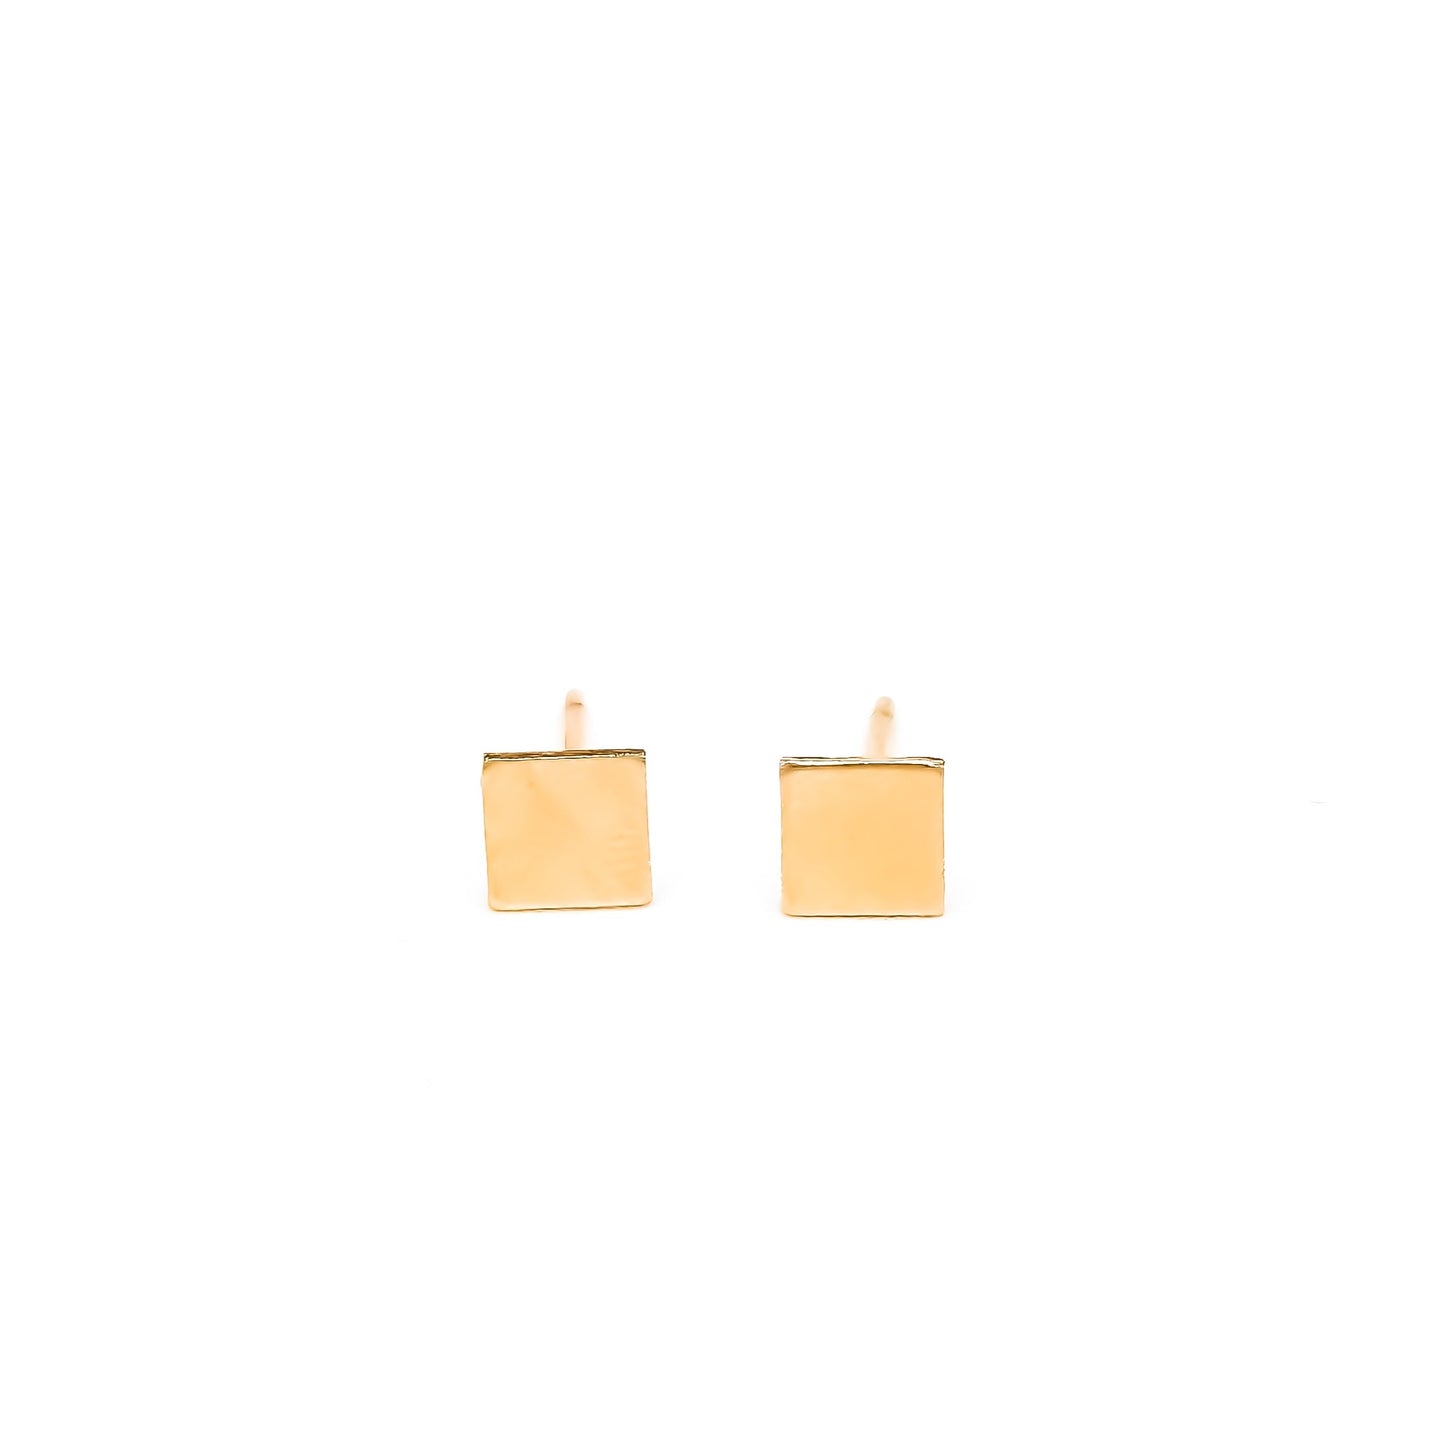 Square Gold-Filled Stud Earring